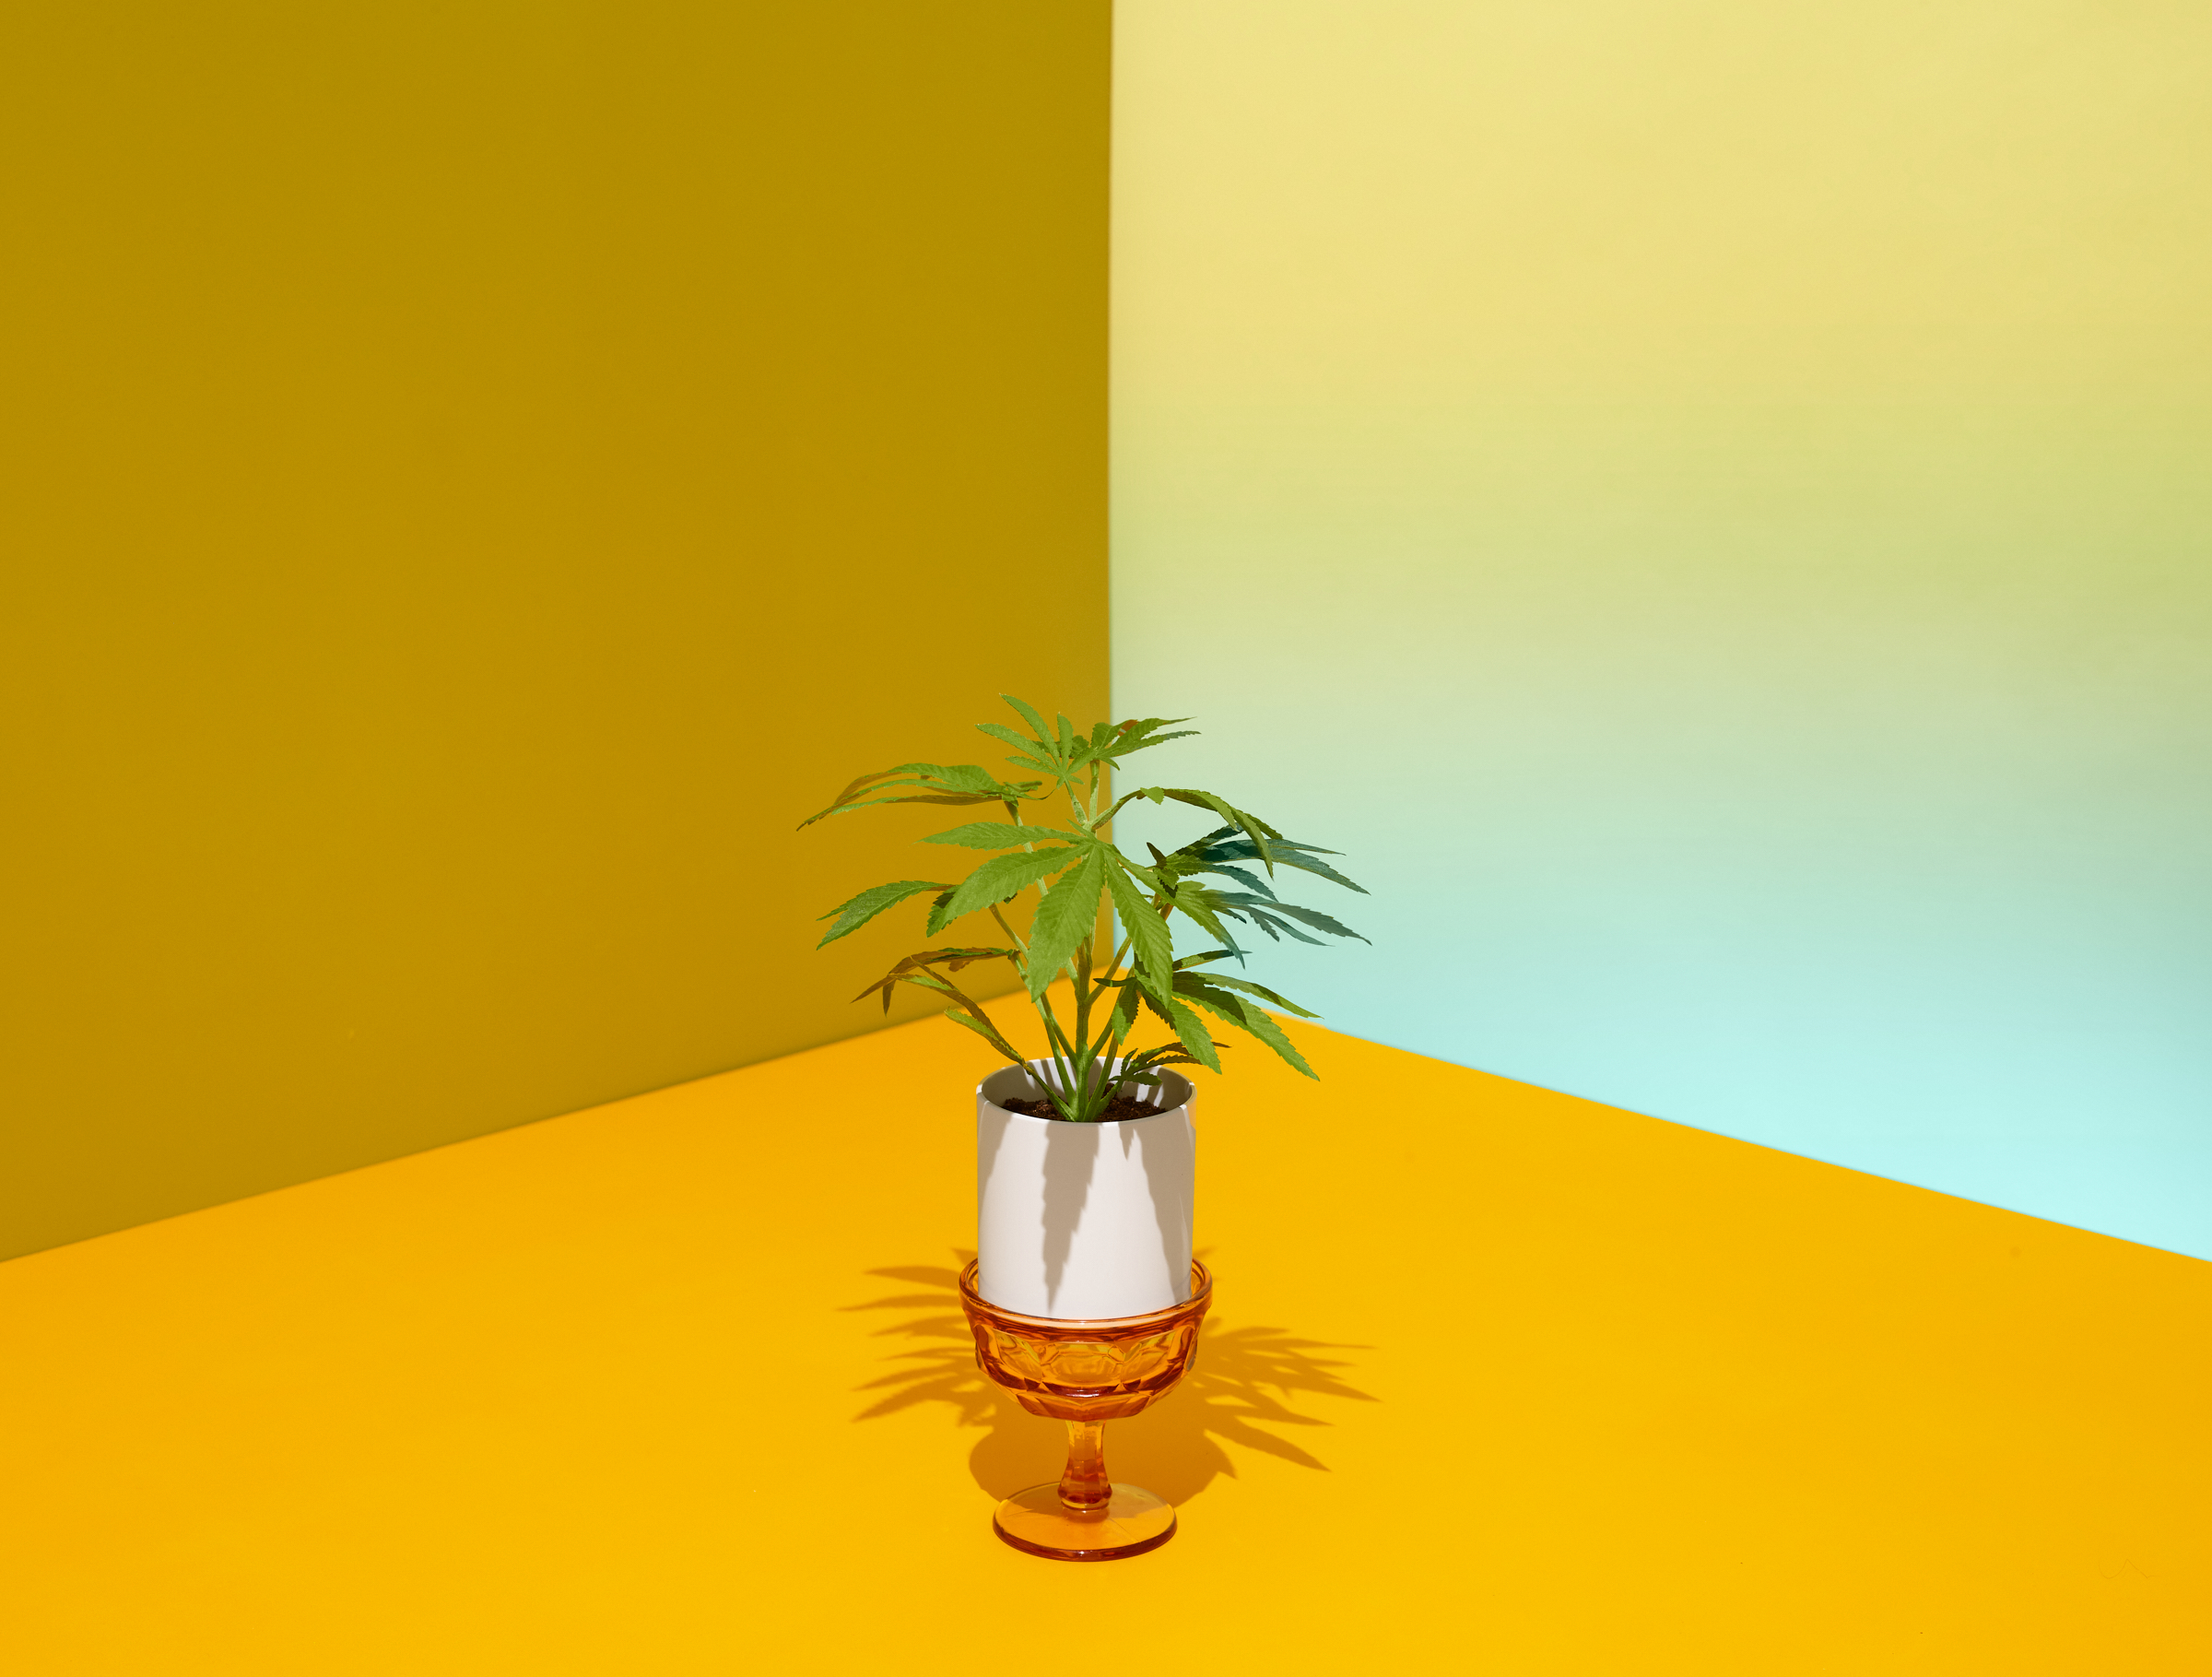 Home Decor: Would you display an artificial cannabis plant?